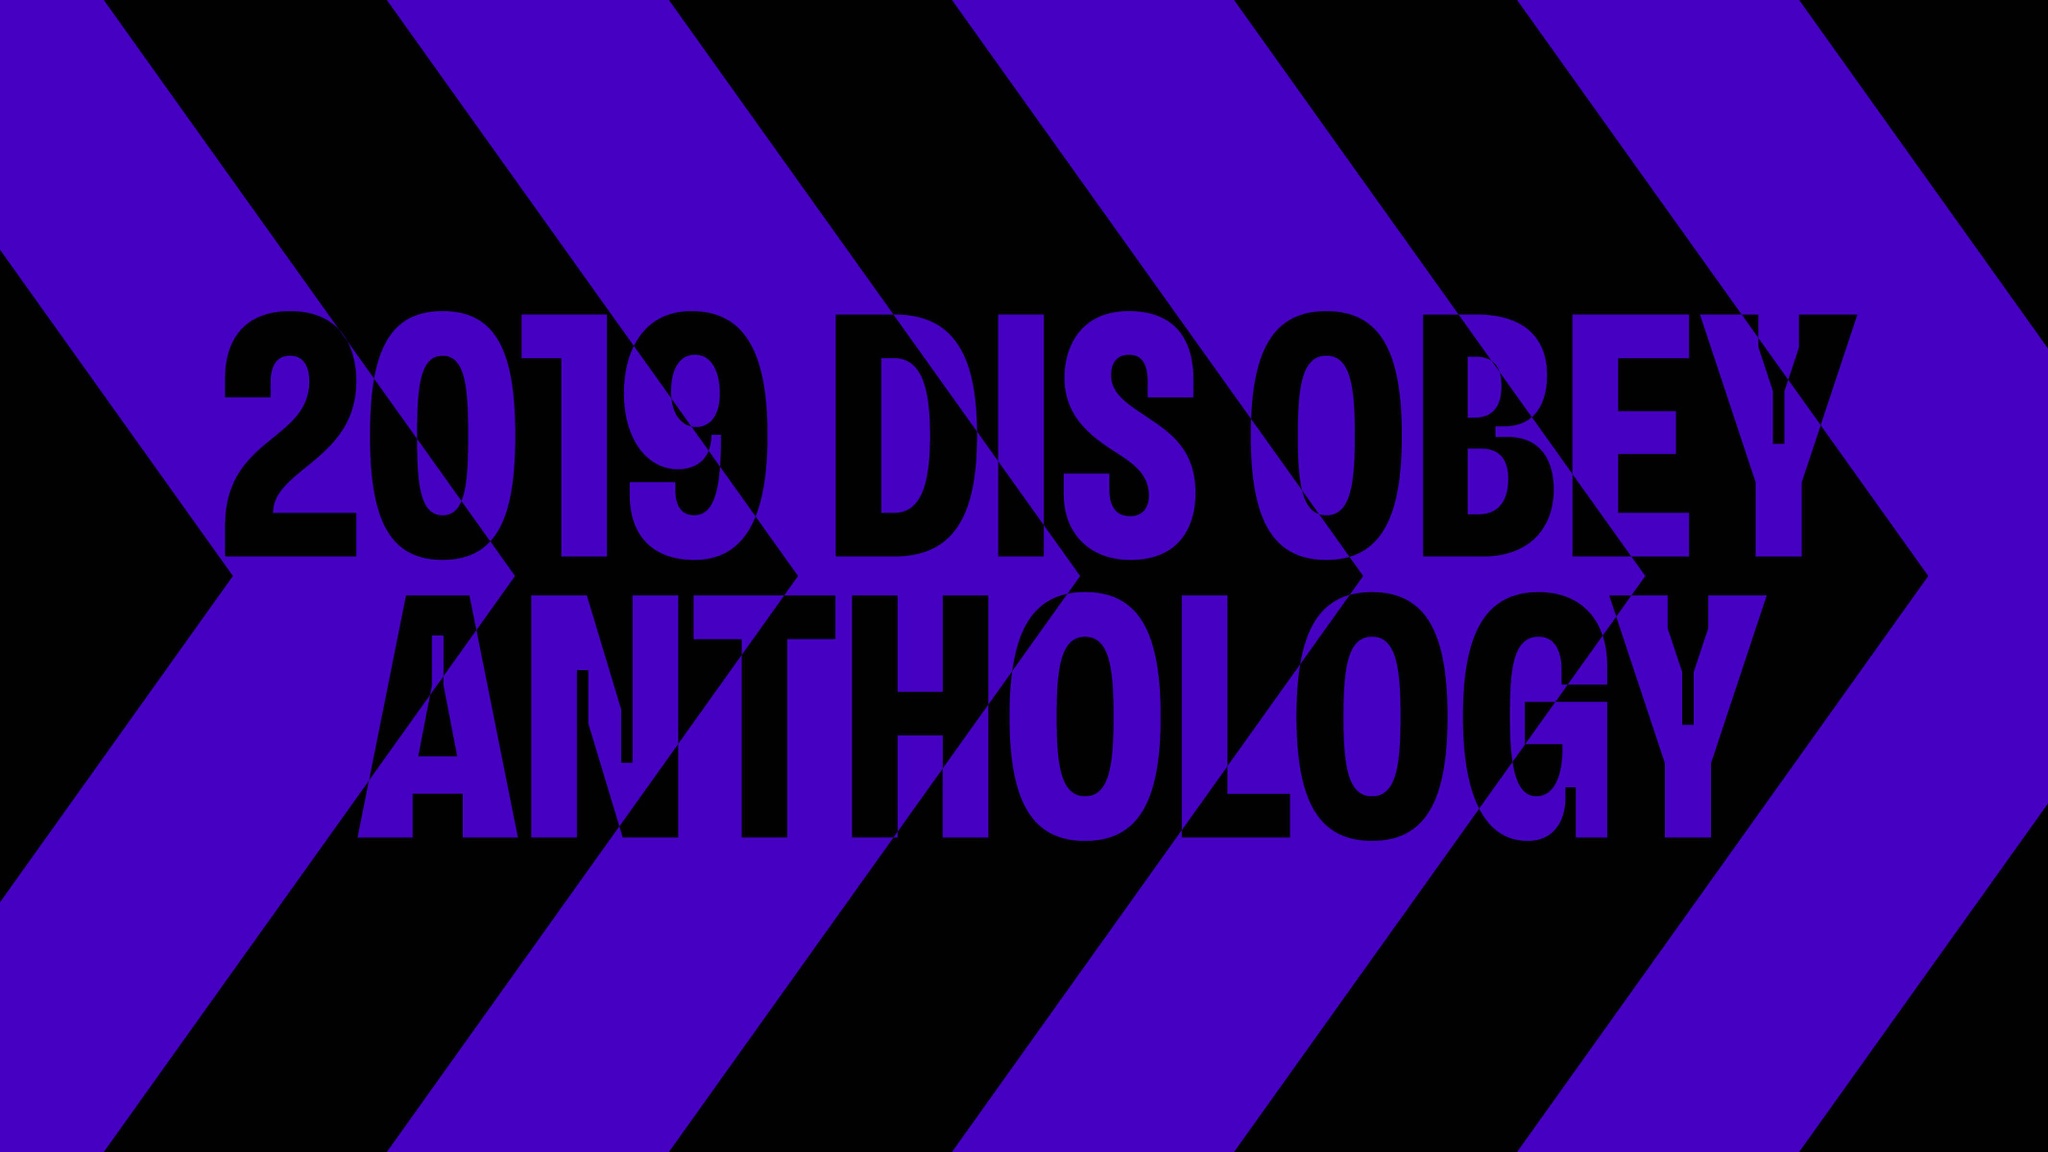 A background of purple and black caution stripes with the title 2019 DIS OBEY Anthology overlaid